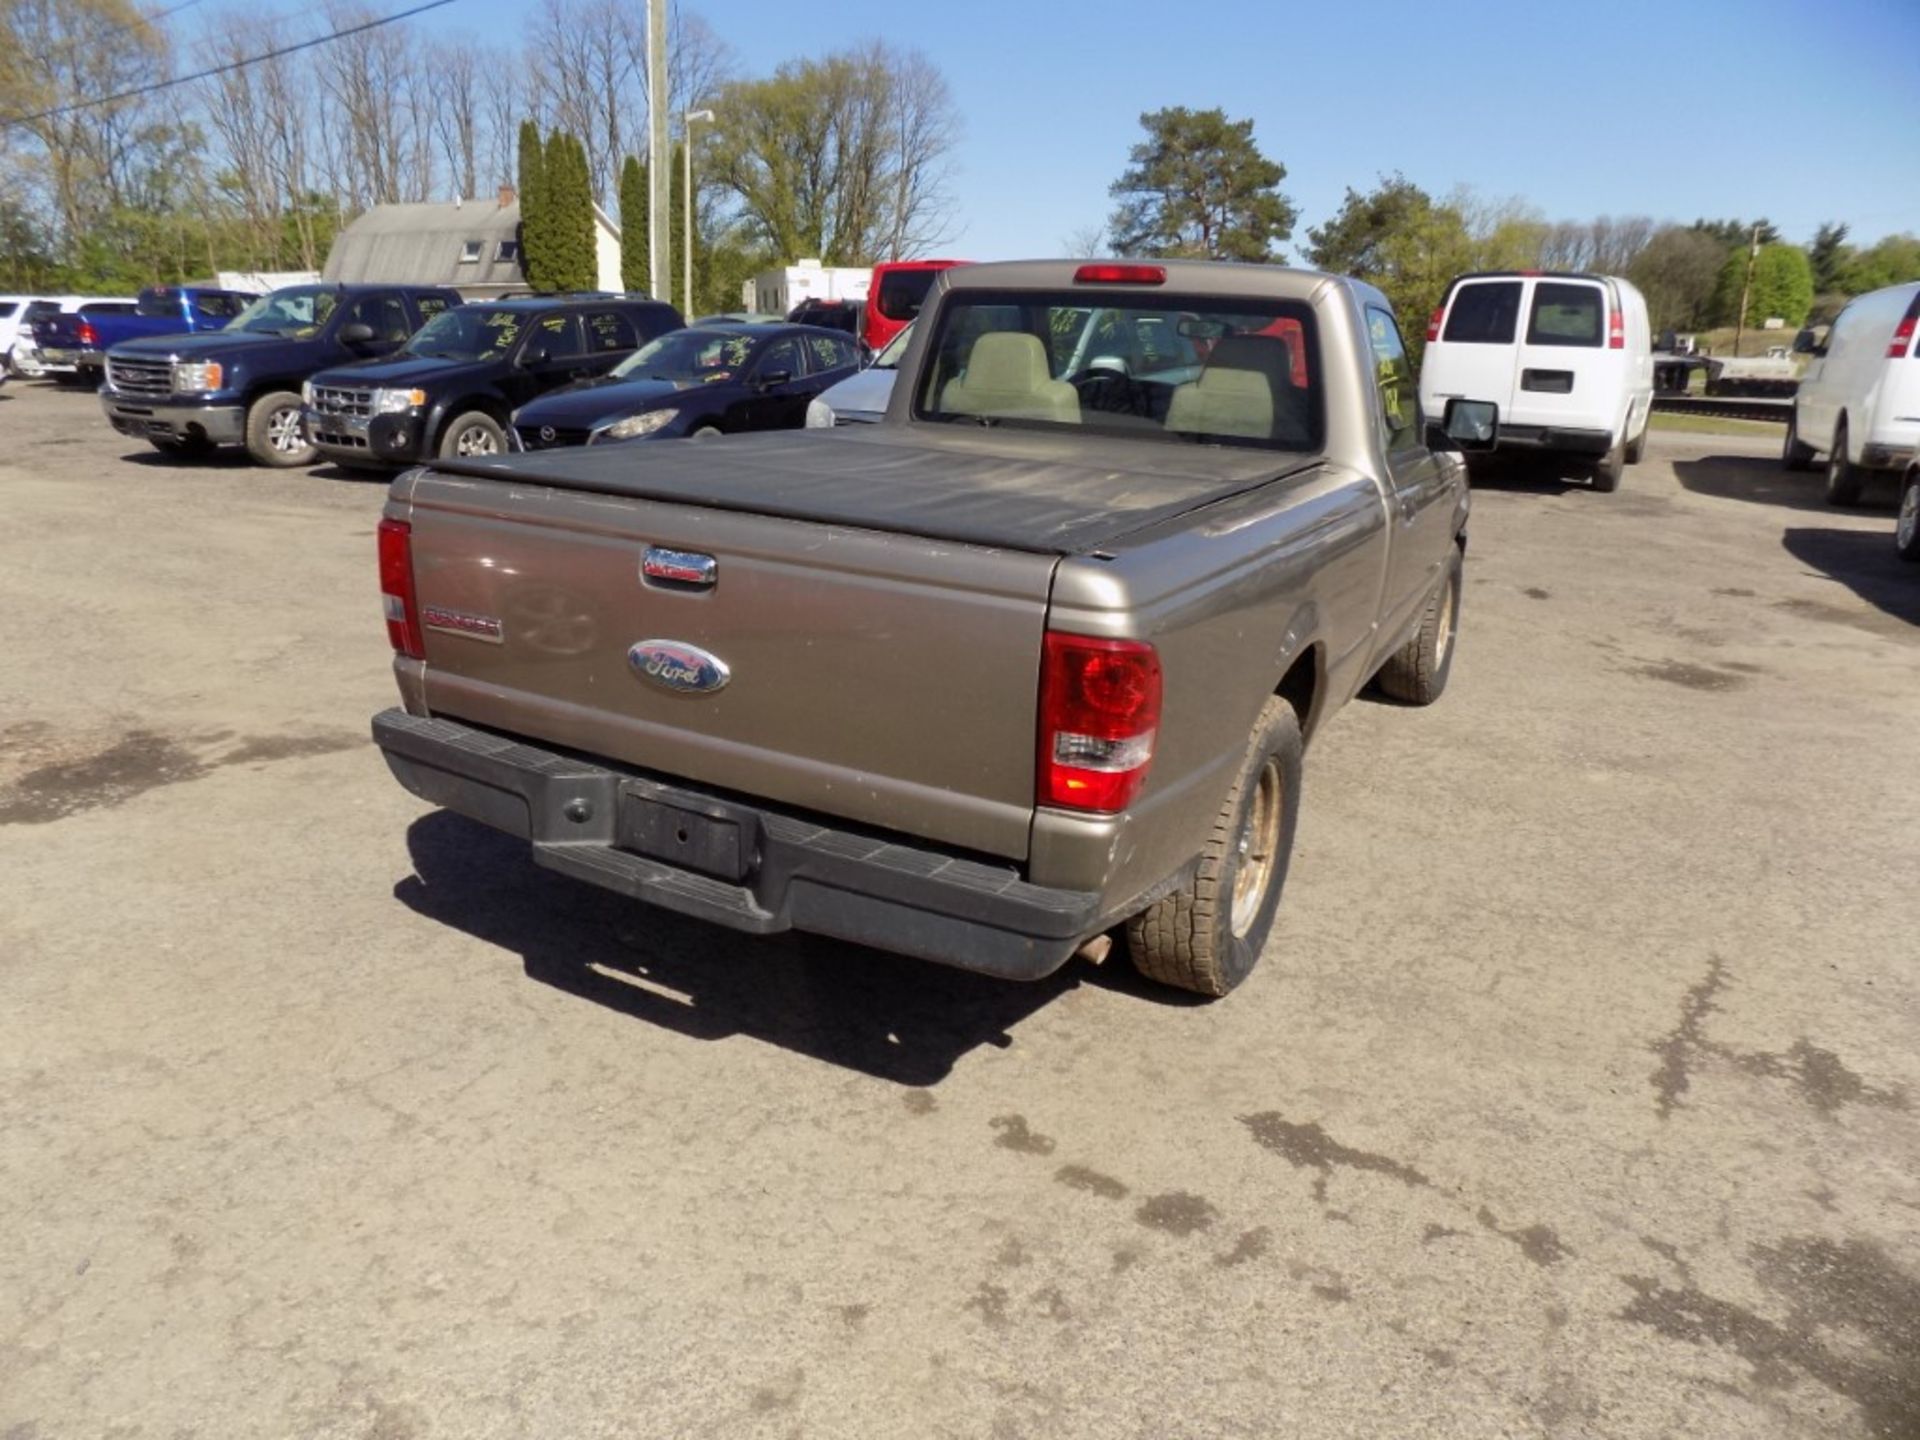 2006 Ford Ranger XLT Reg. Cab, 2 WD, Gold, 5 Speed Manual Trans., Toneau Cover, 136,652 Miles, Vin # - Image 3 of 4